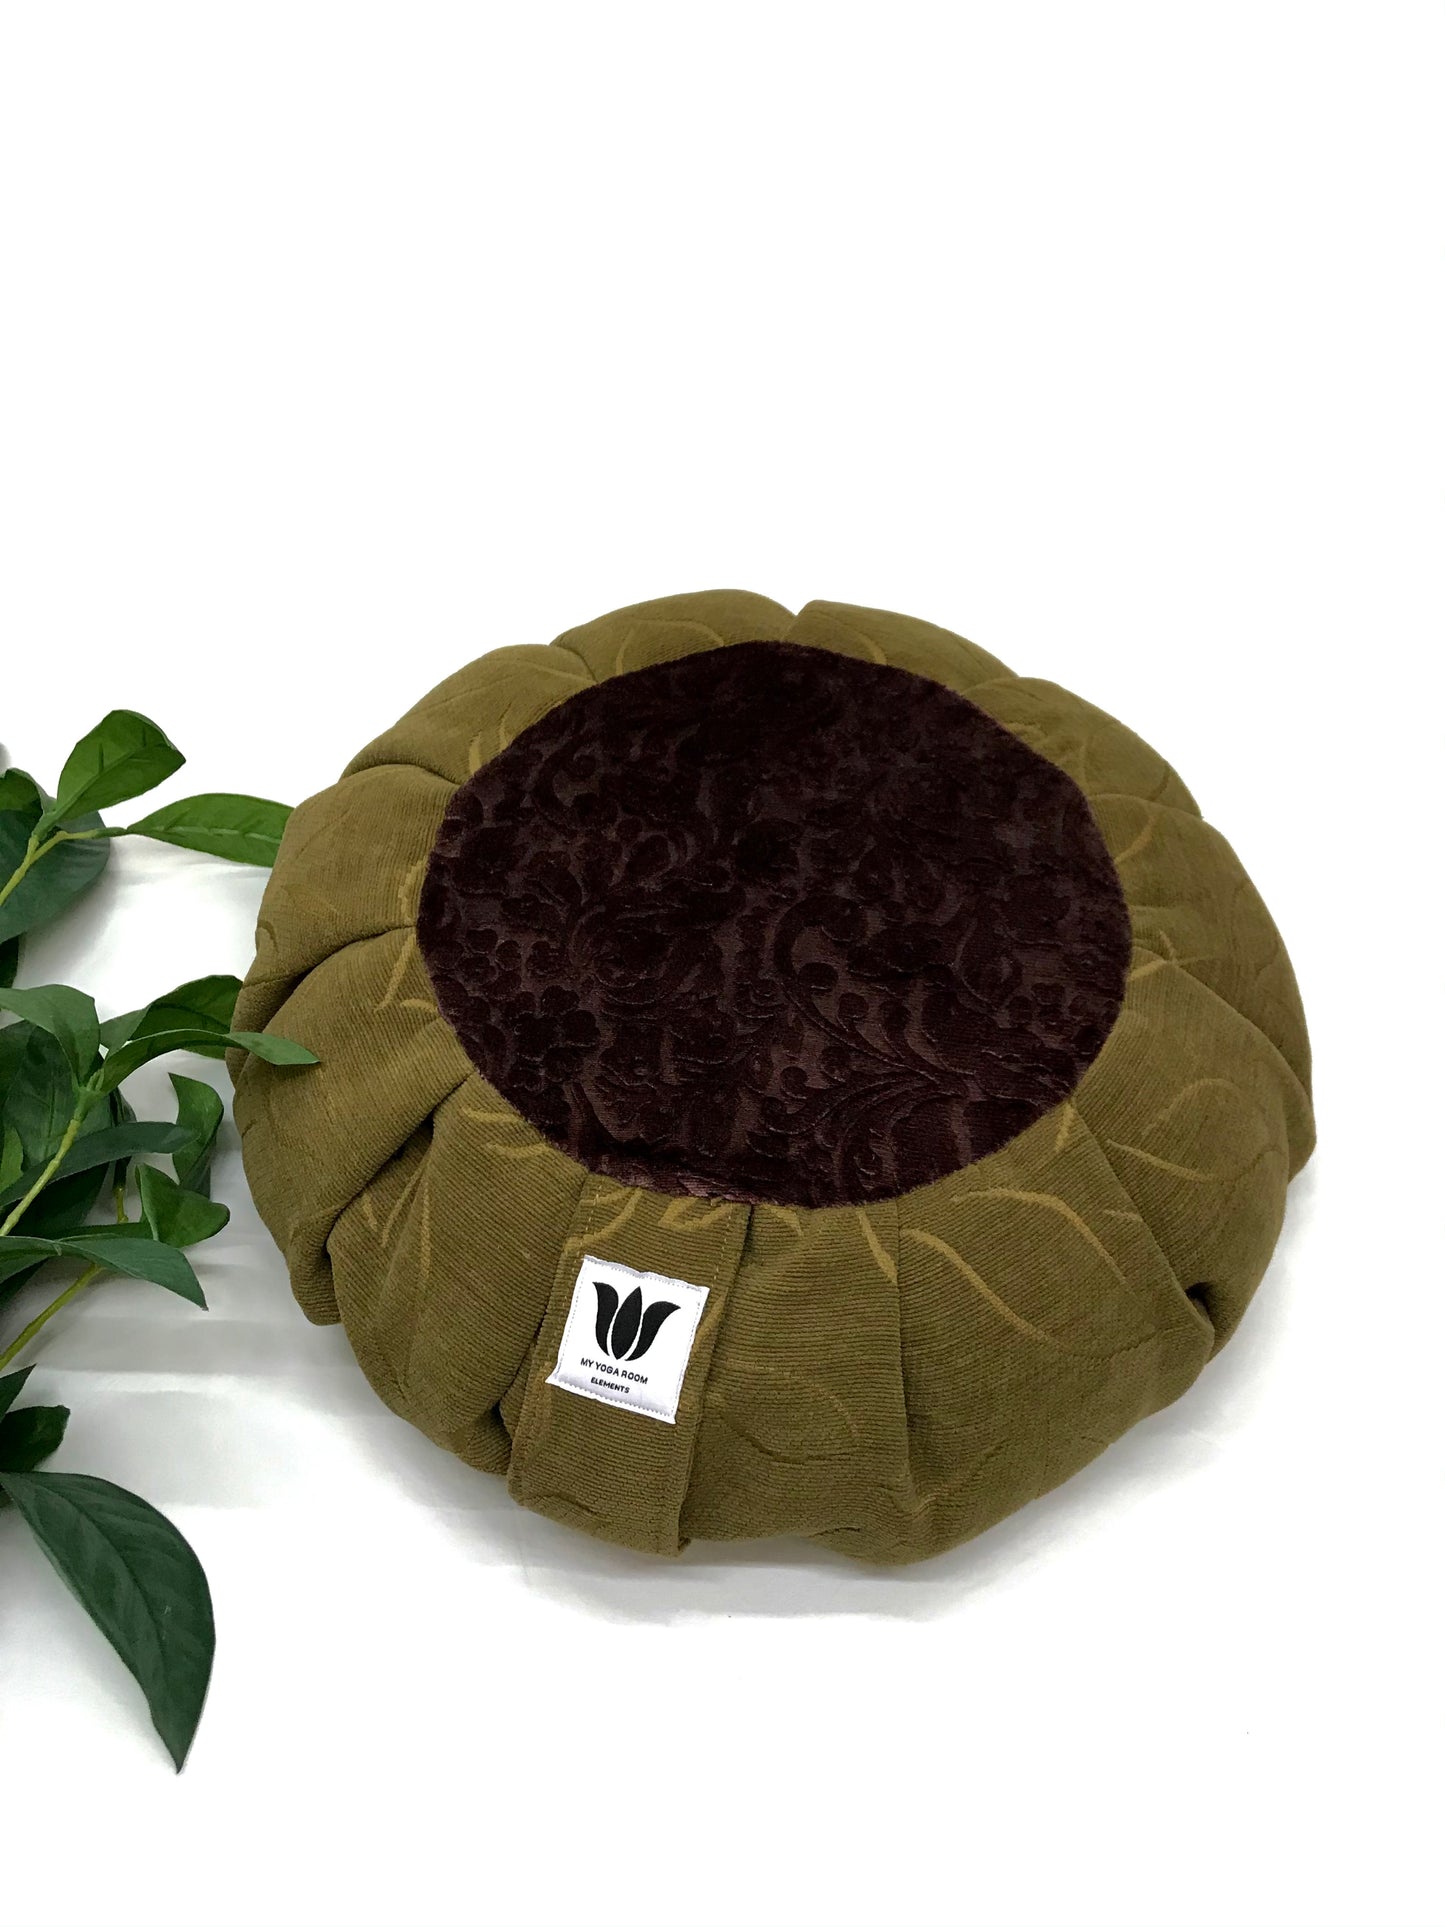 Handcrafted premium embossed plush fabric meditation seat cushion in rich caramel and royal purple fabric. Align the spine and body in comfort to calm the monkey mind in your meditation practice. Handcrafted in Calgary, Alberta Canada